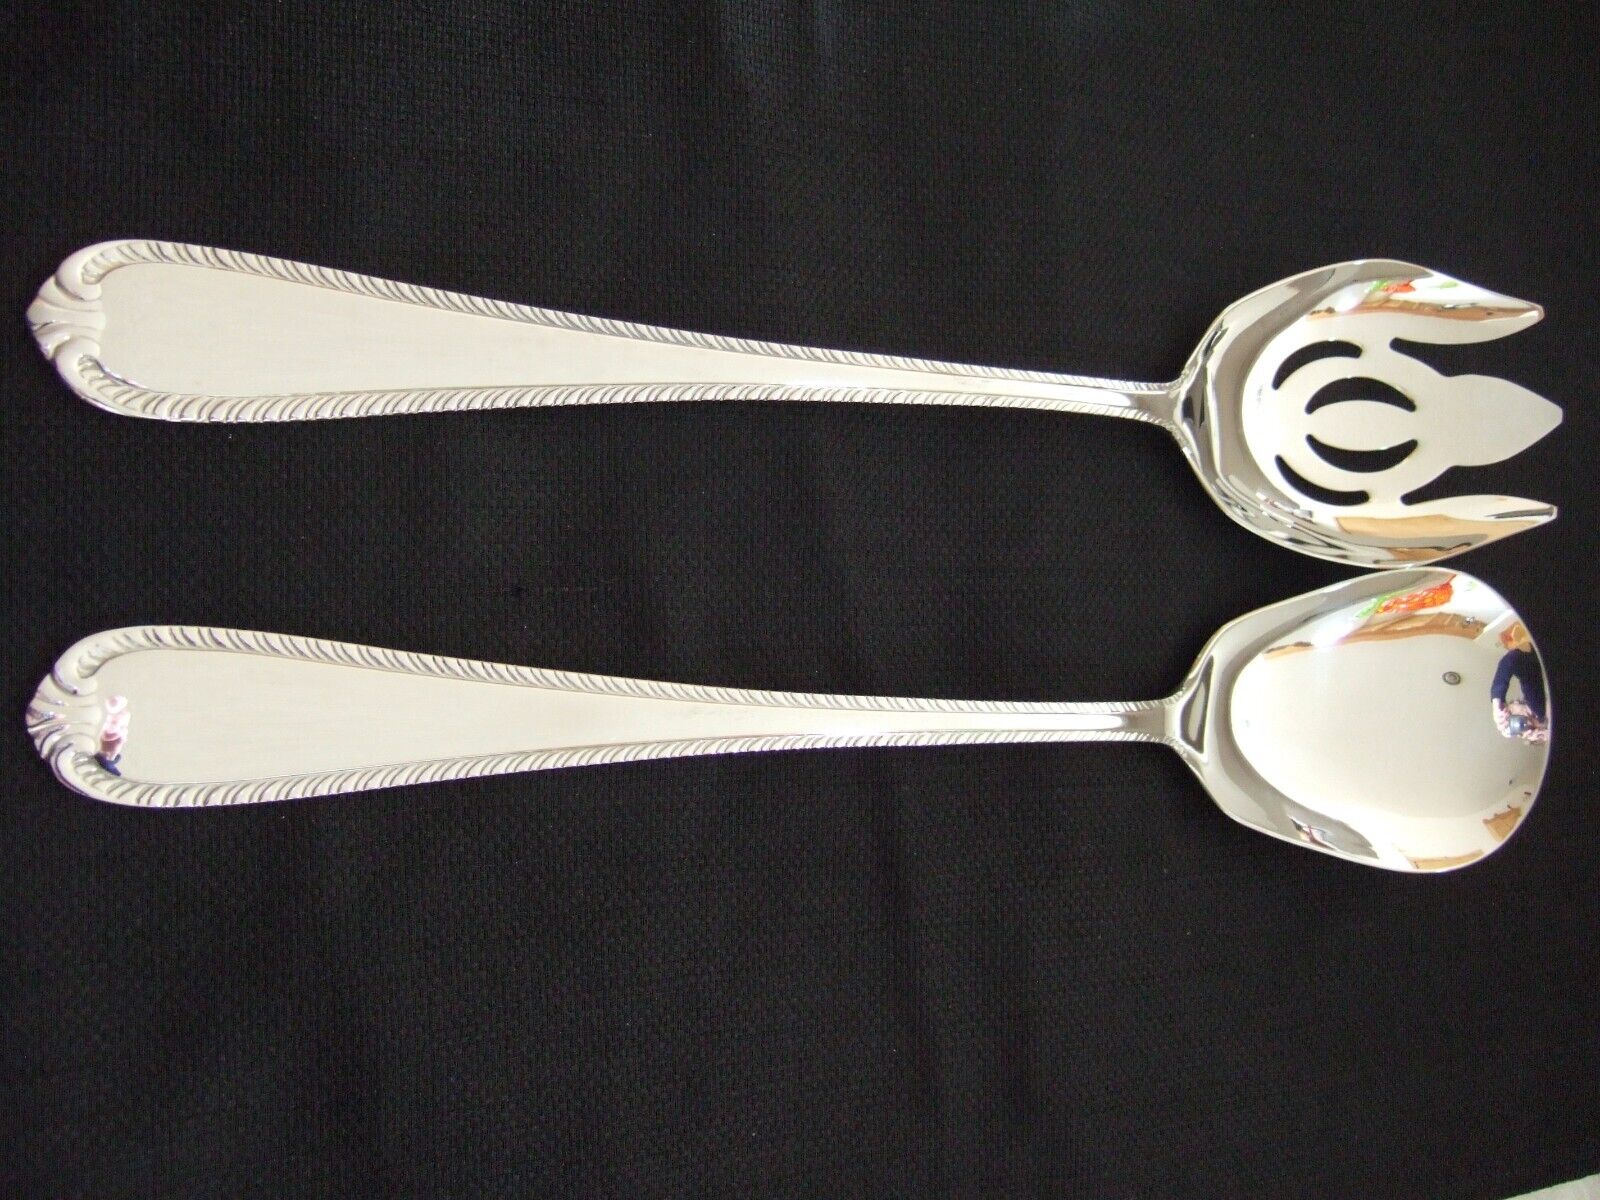 PAIR OF SALAD SERVERS REED & BARTON DOMAIN PATTERN 18/10 STAINLESS